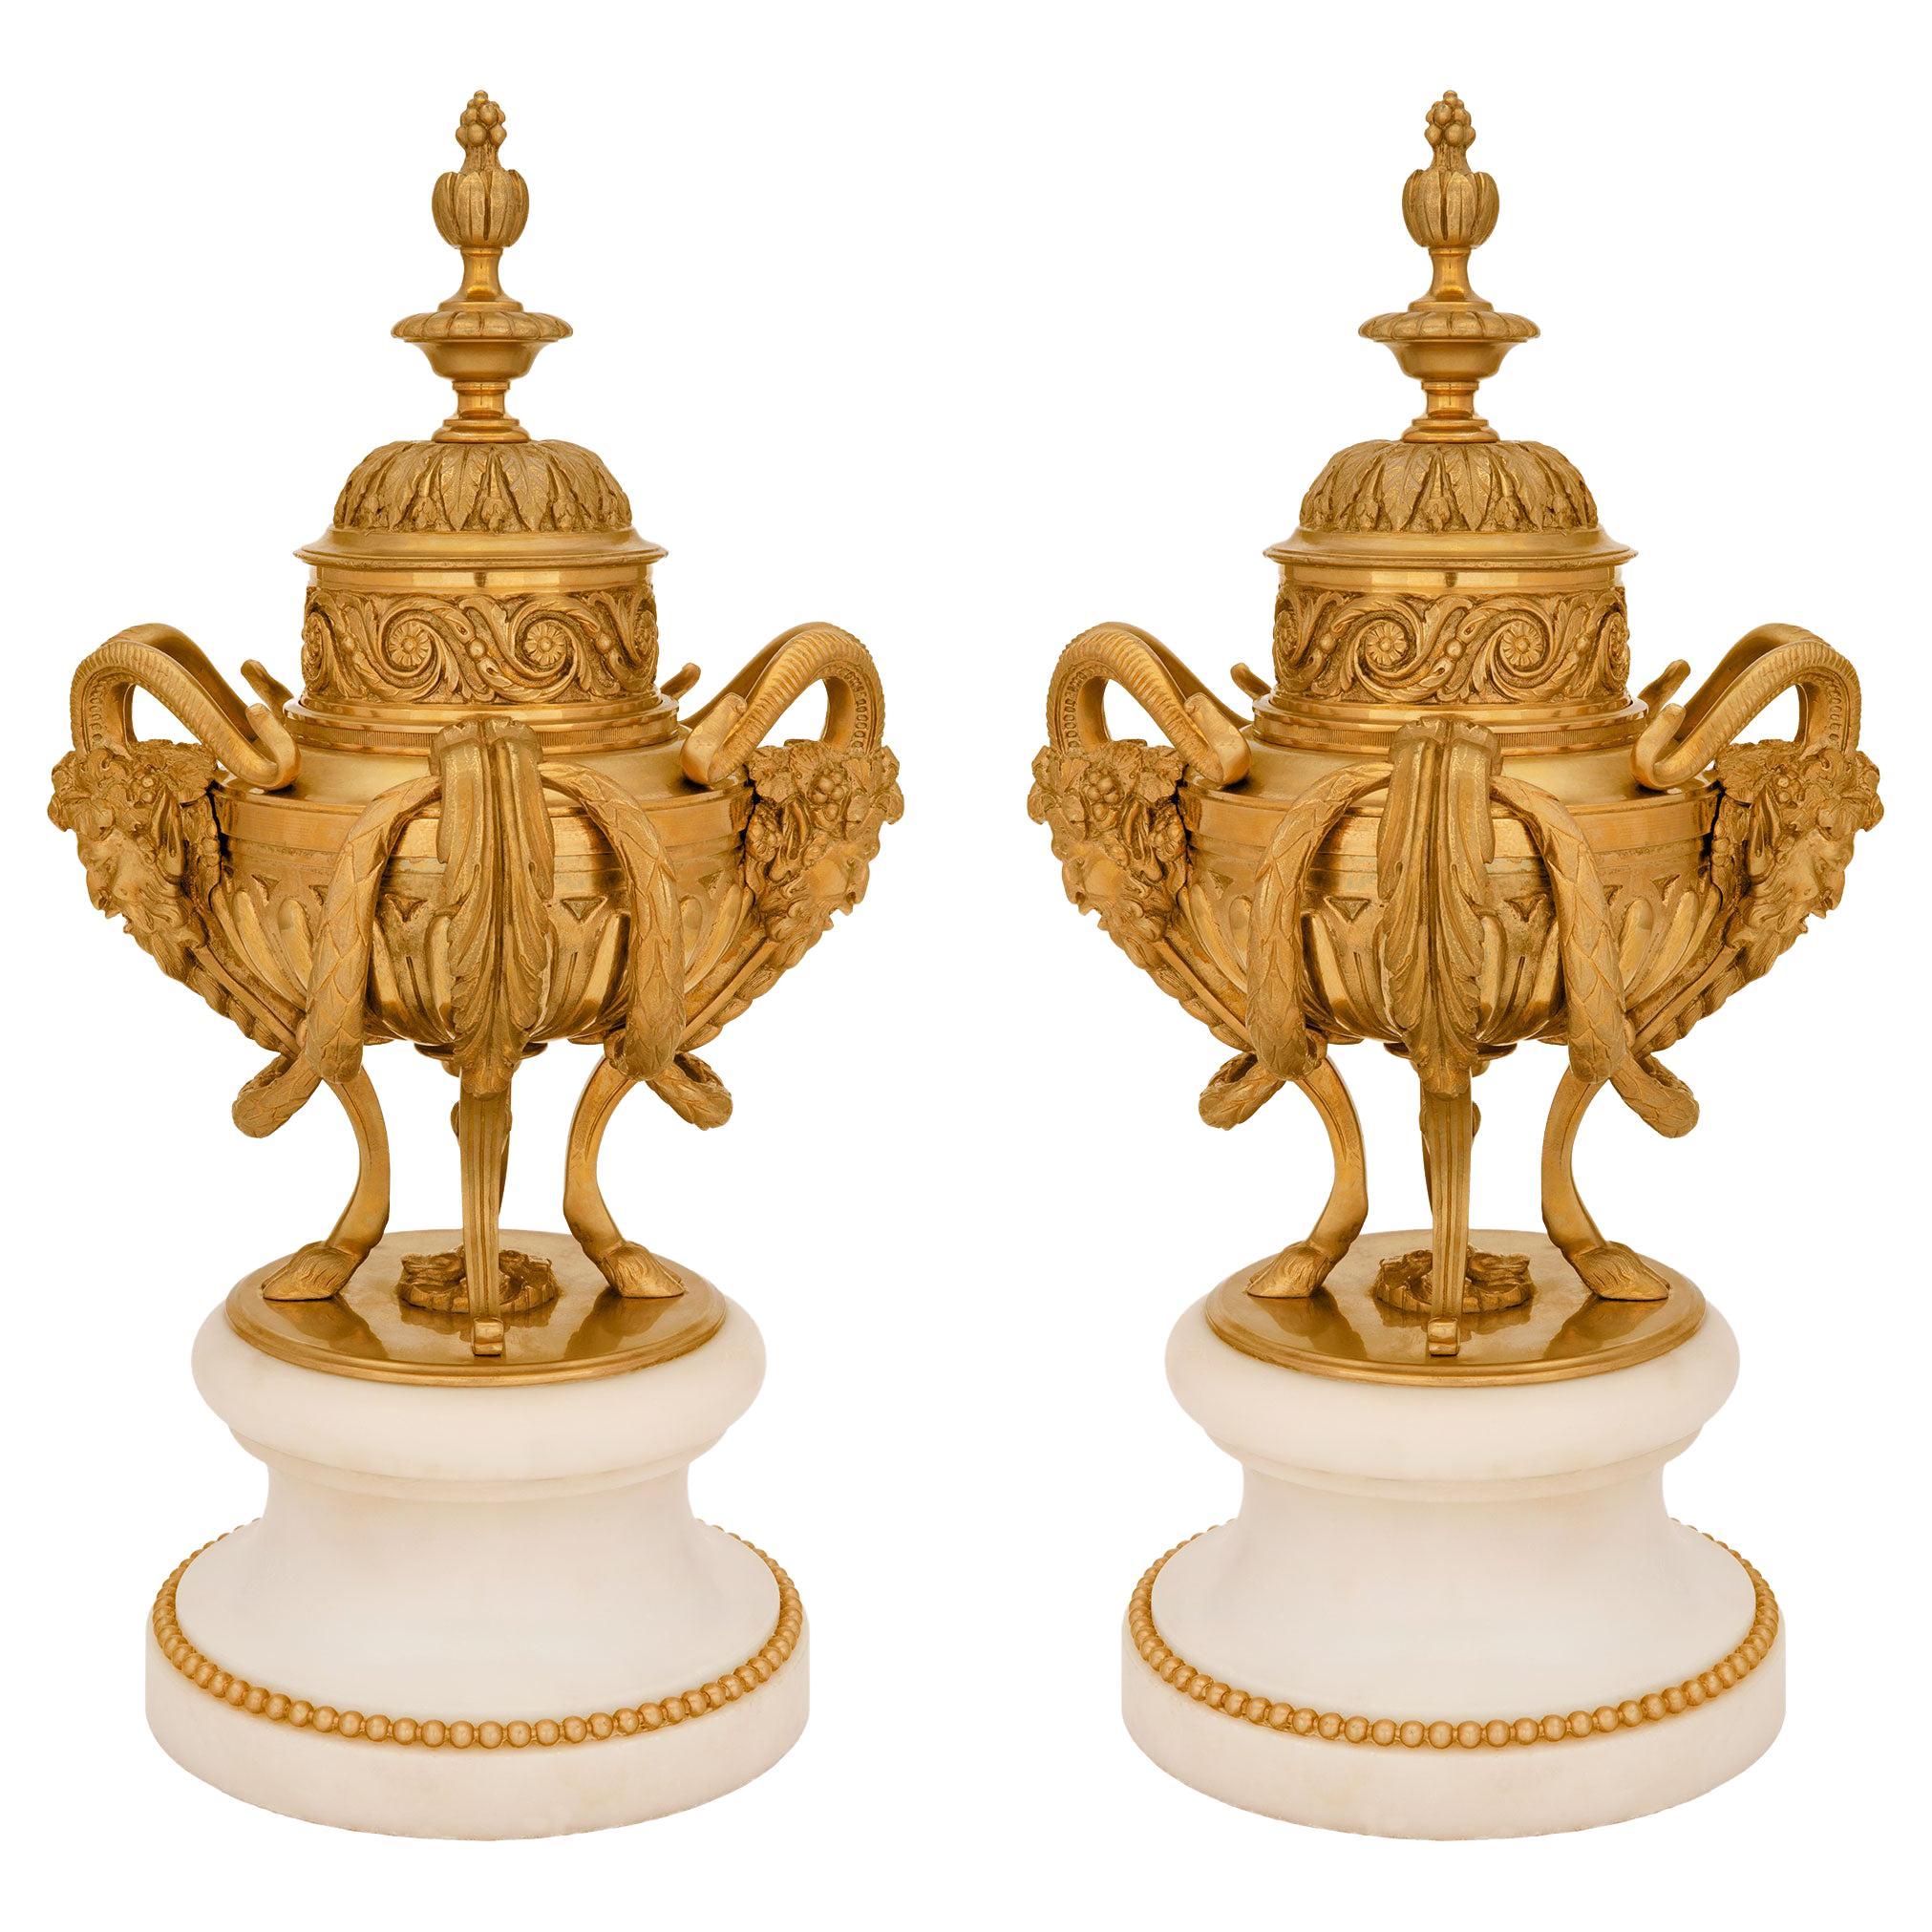 Pair of French 19th Century Louis XVI Style Ormolu and Marble Lidded Urns